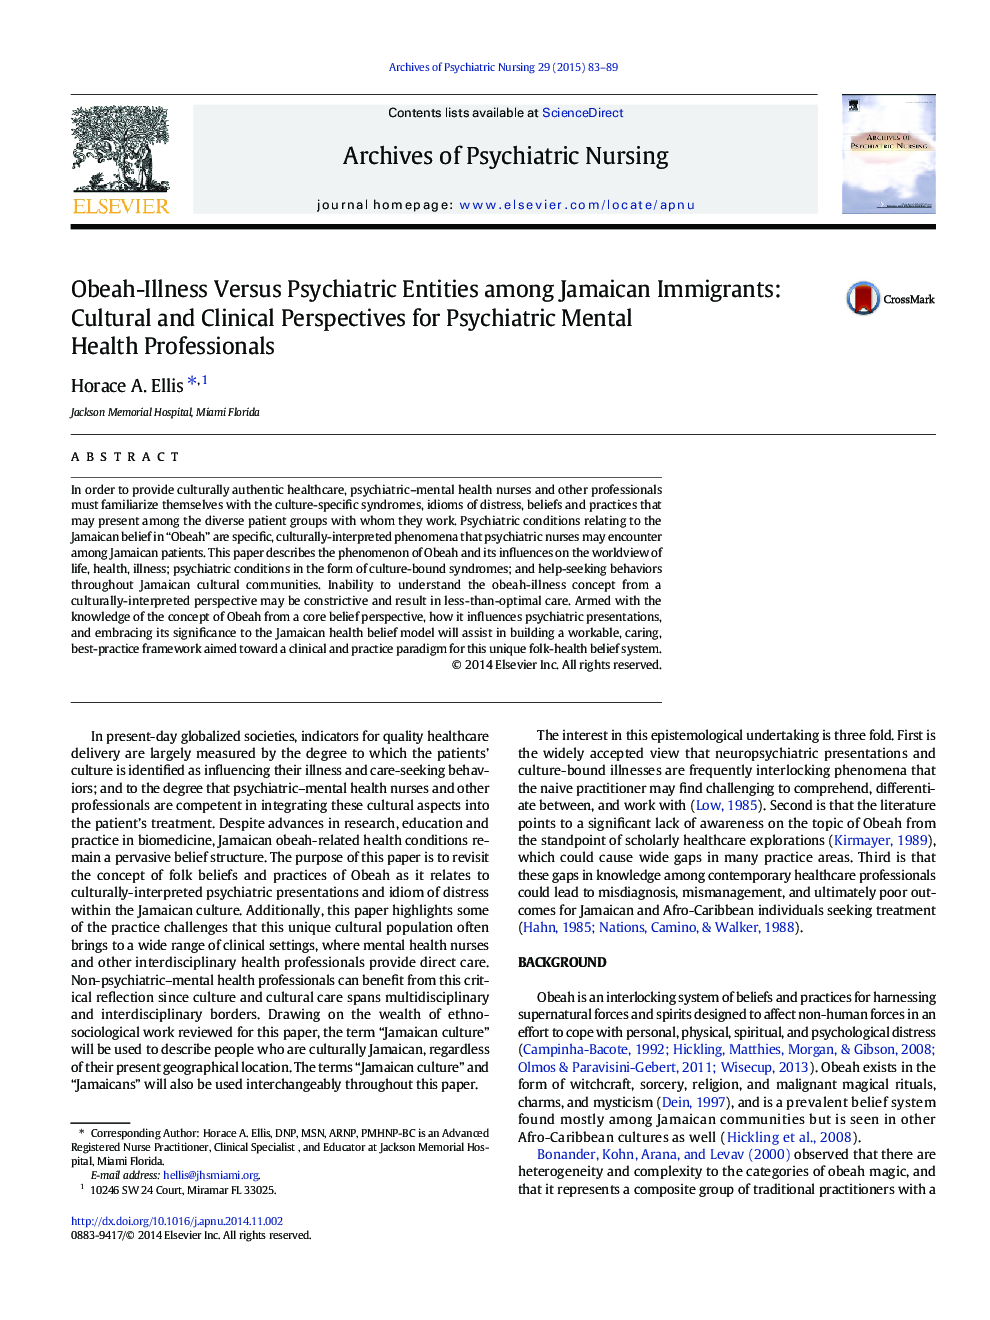 Obeah-Illness Versus Psychiatric Entities among Jamaican Immigrants: Cultural and Clinical Perspectives for Psychiatric Mental Health Professionals